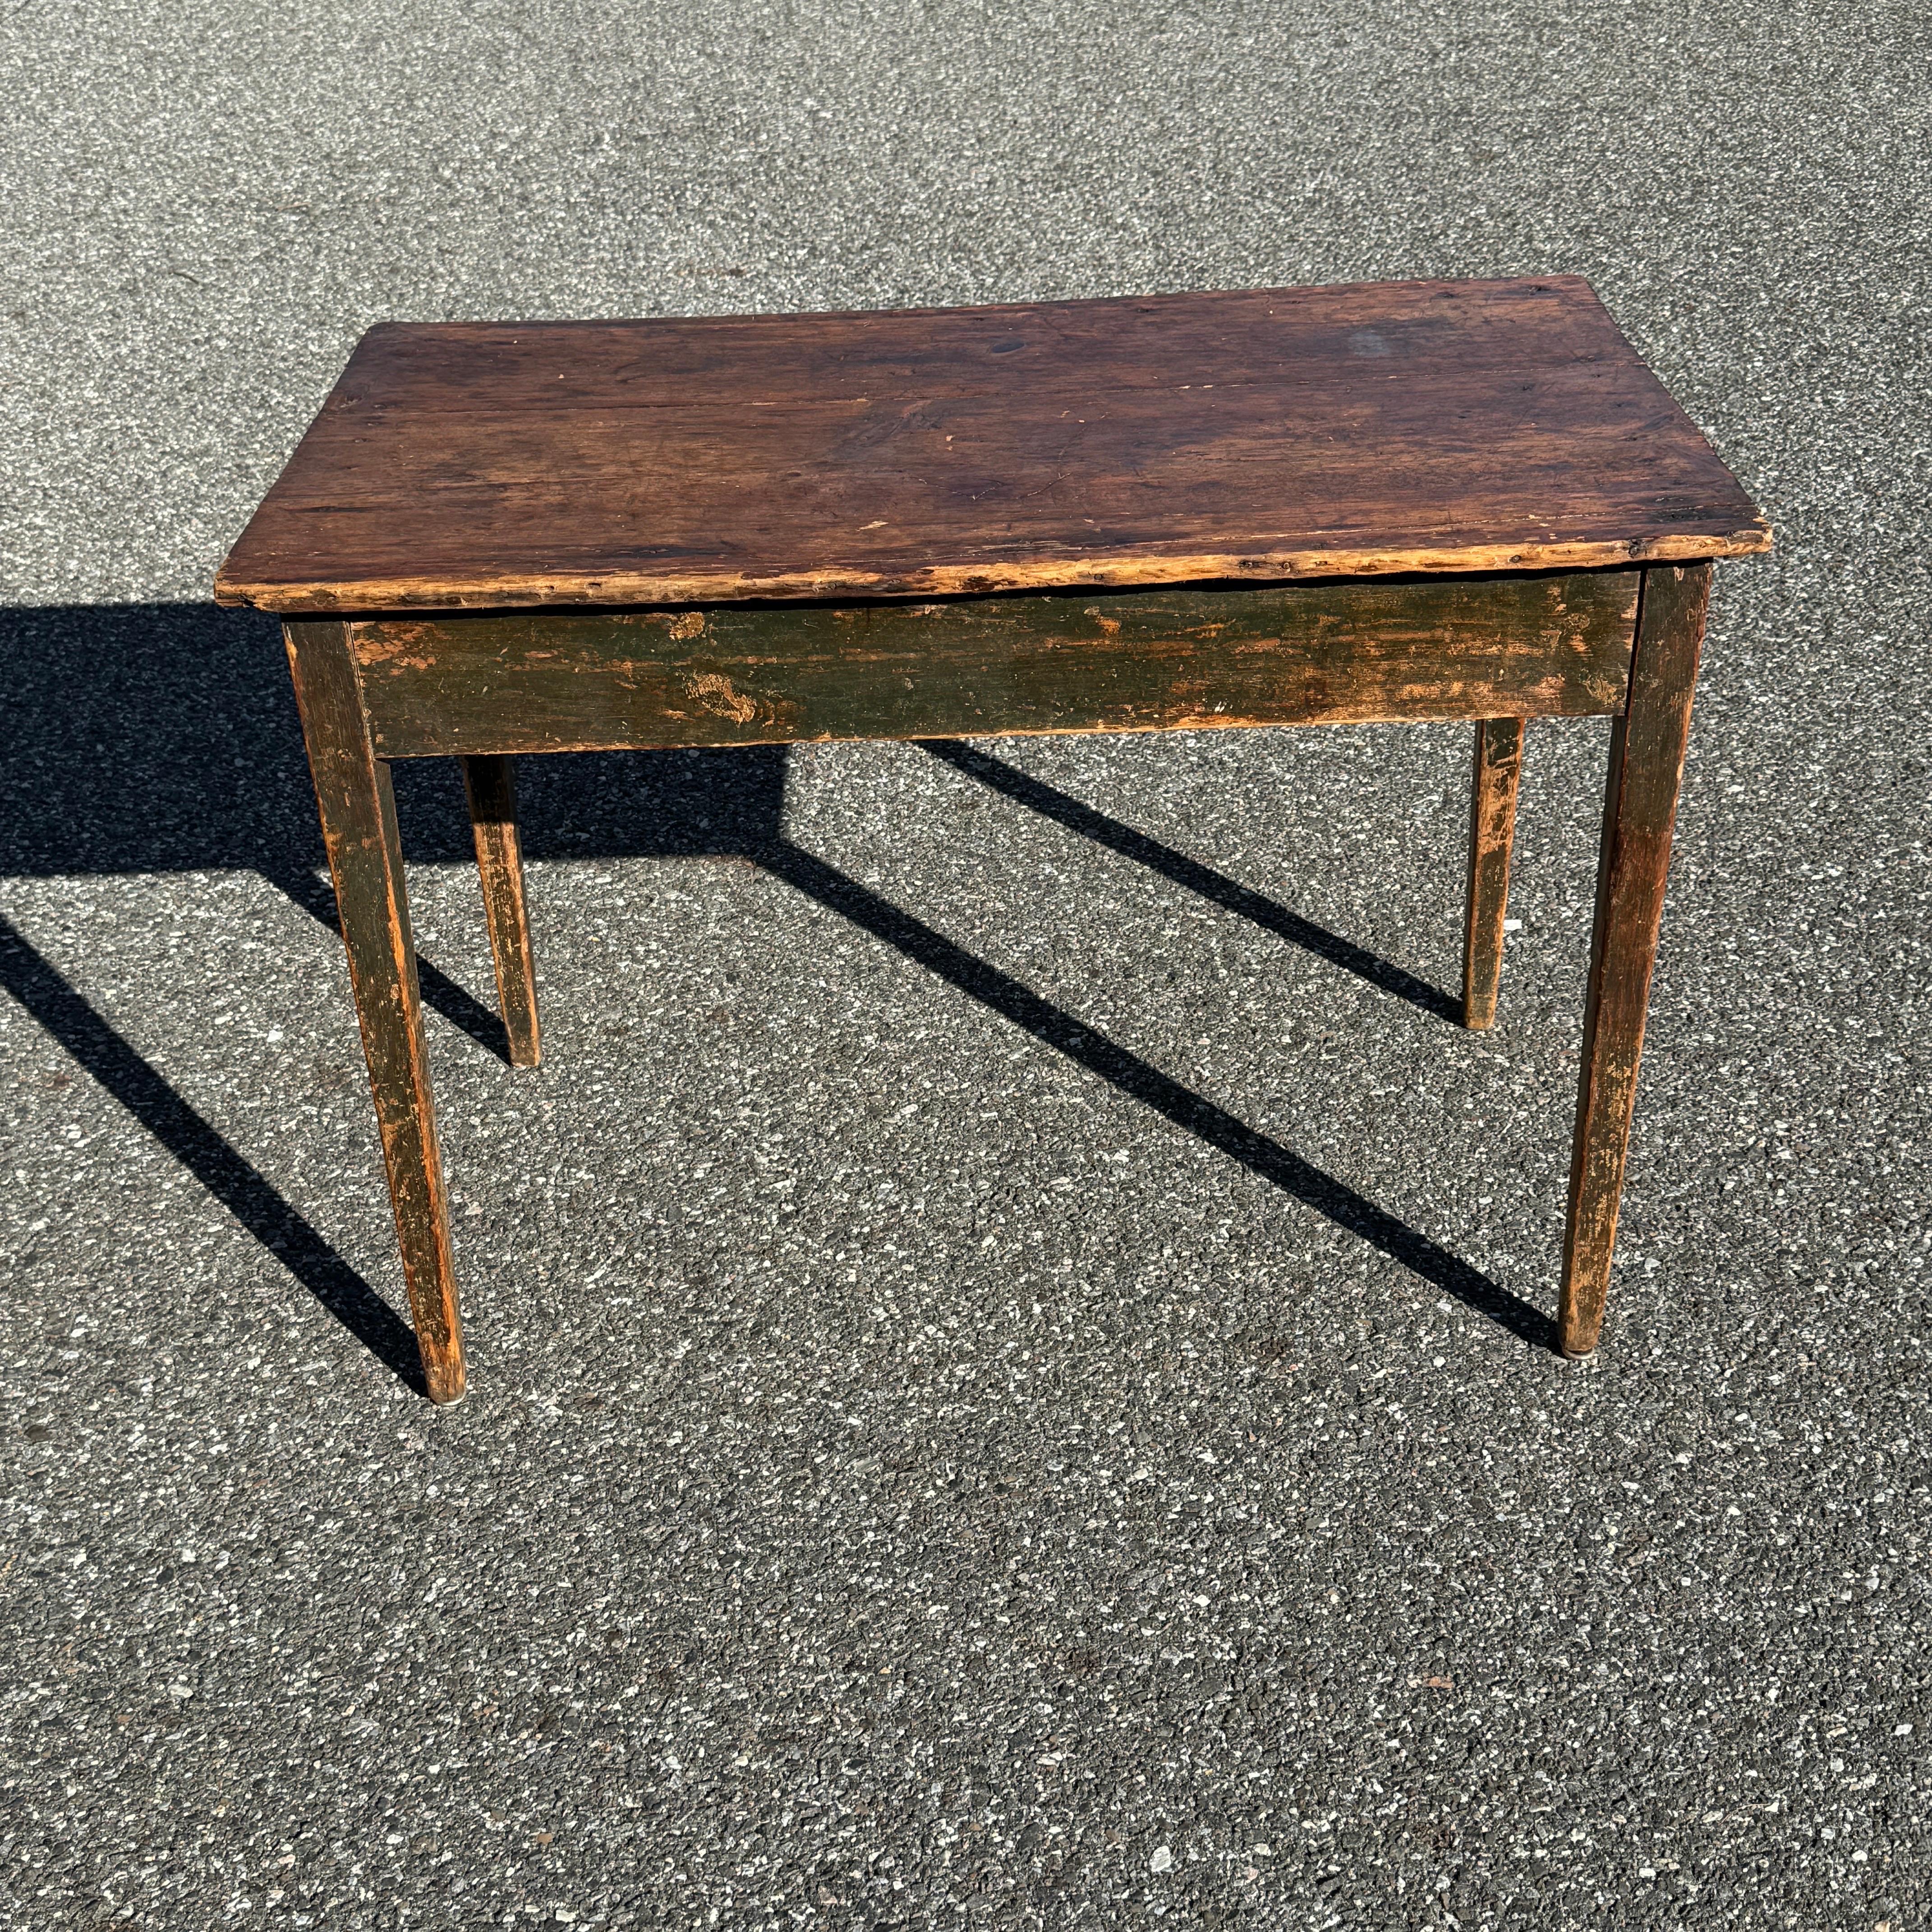 Danish or Swedish Rectangular Folk Art Table or Desk. 
The table has tonnes of charm, wear and tear to the finish that gives thus table an unbeatable patina. Most of the original paint to the sides has been worn out or scraped away.

